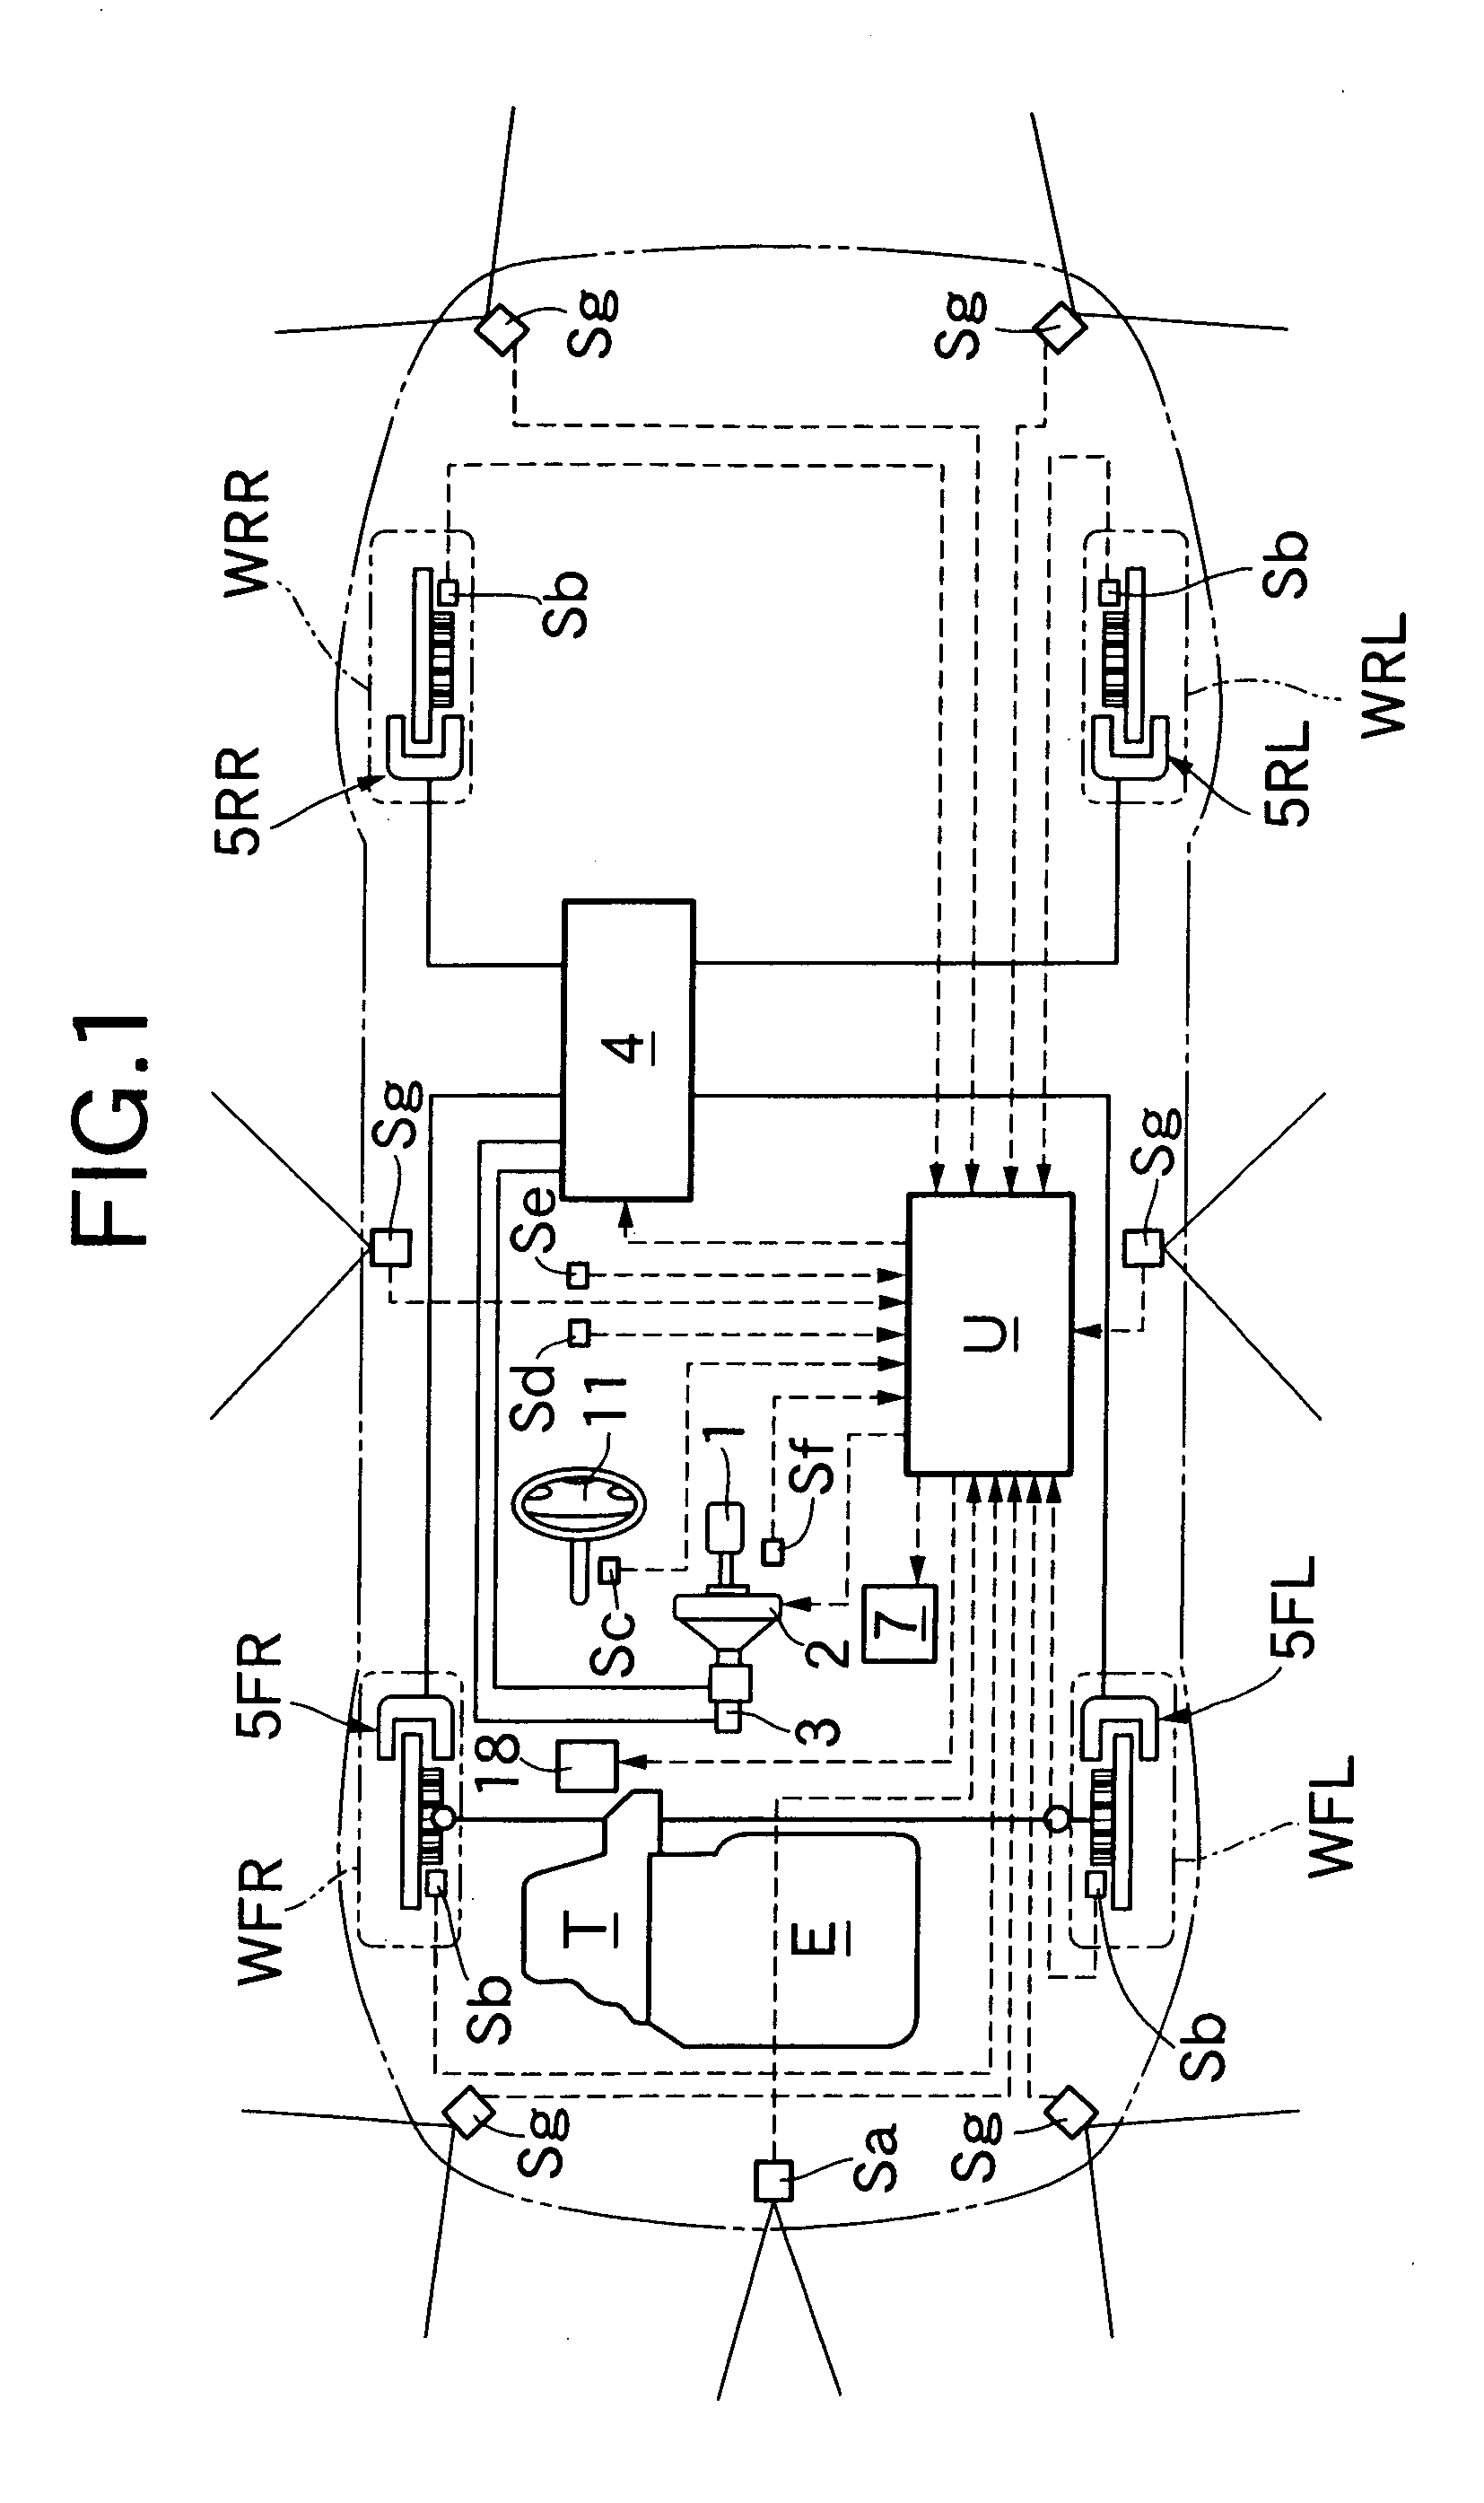 Vehicle operation assisiting system